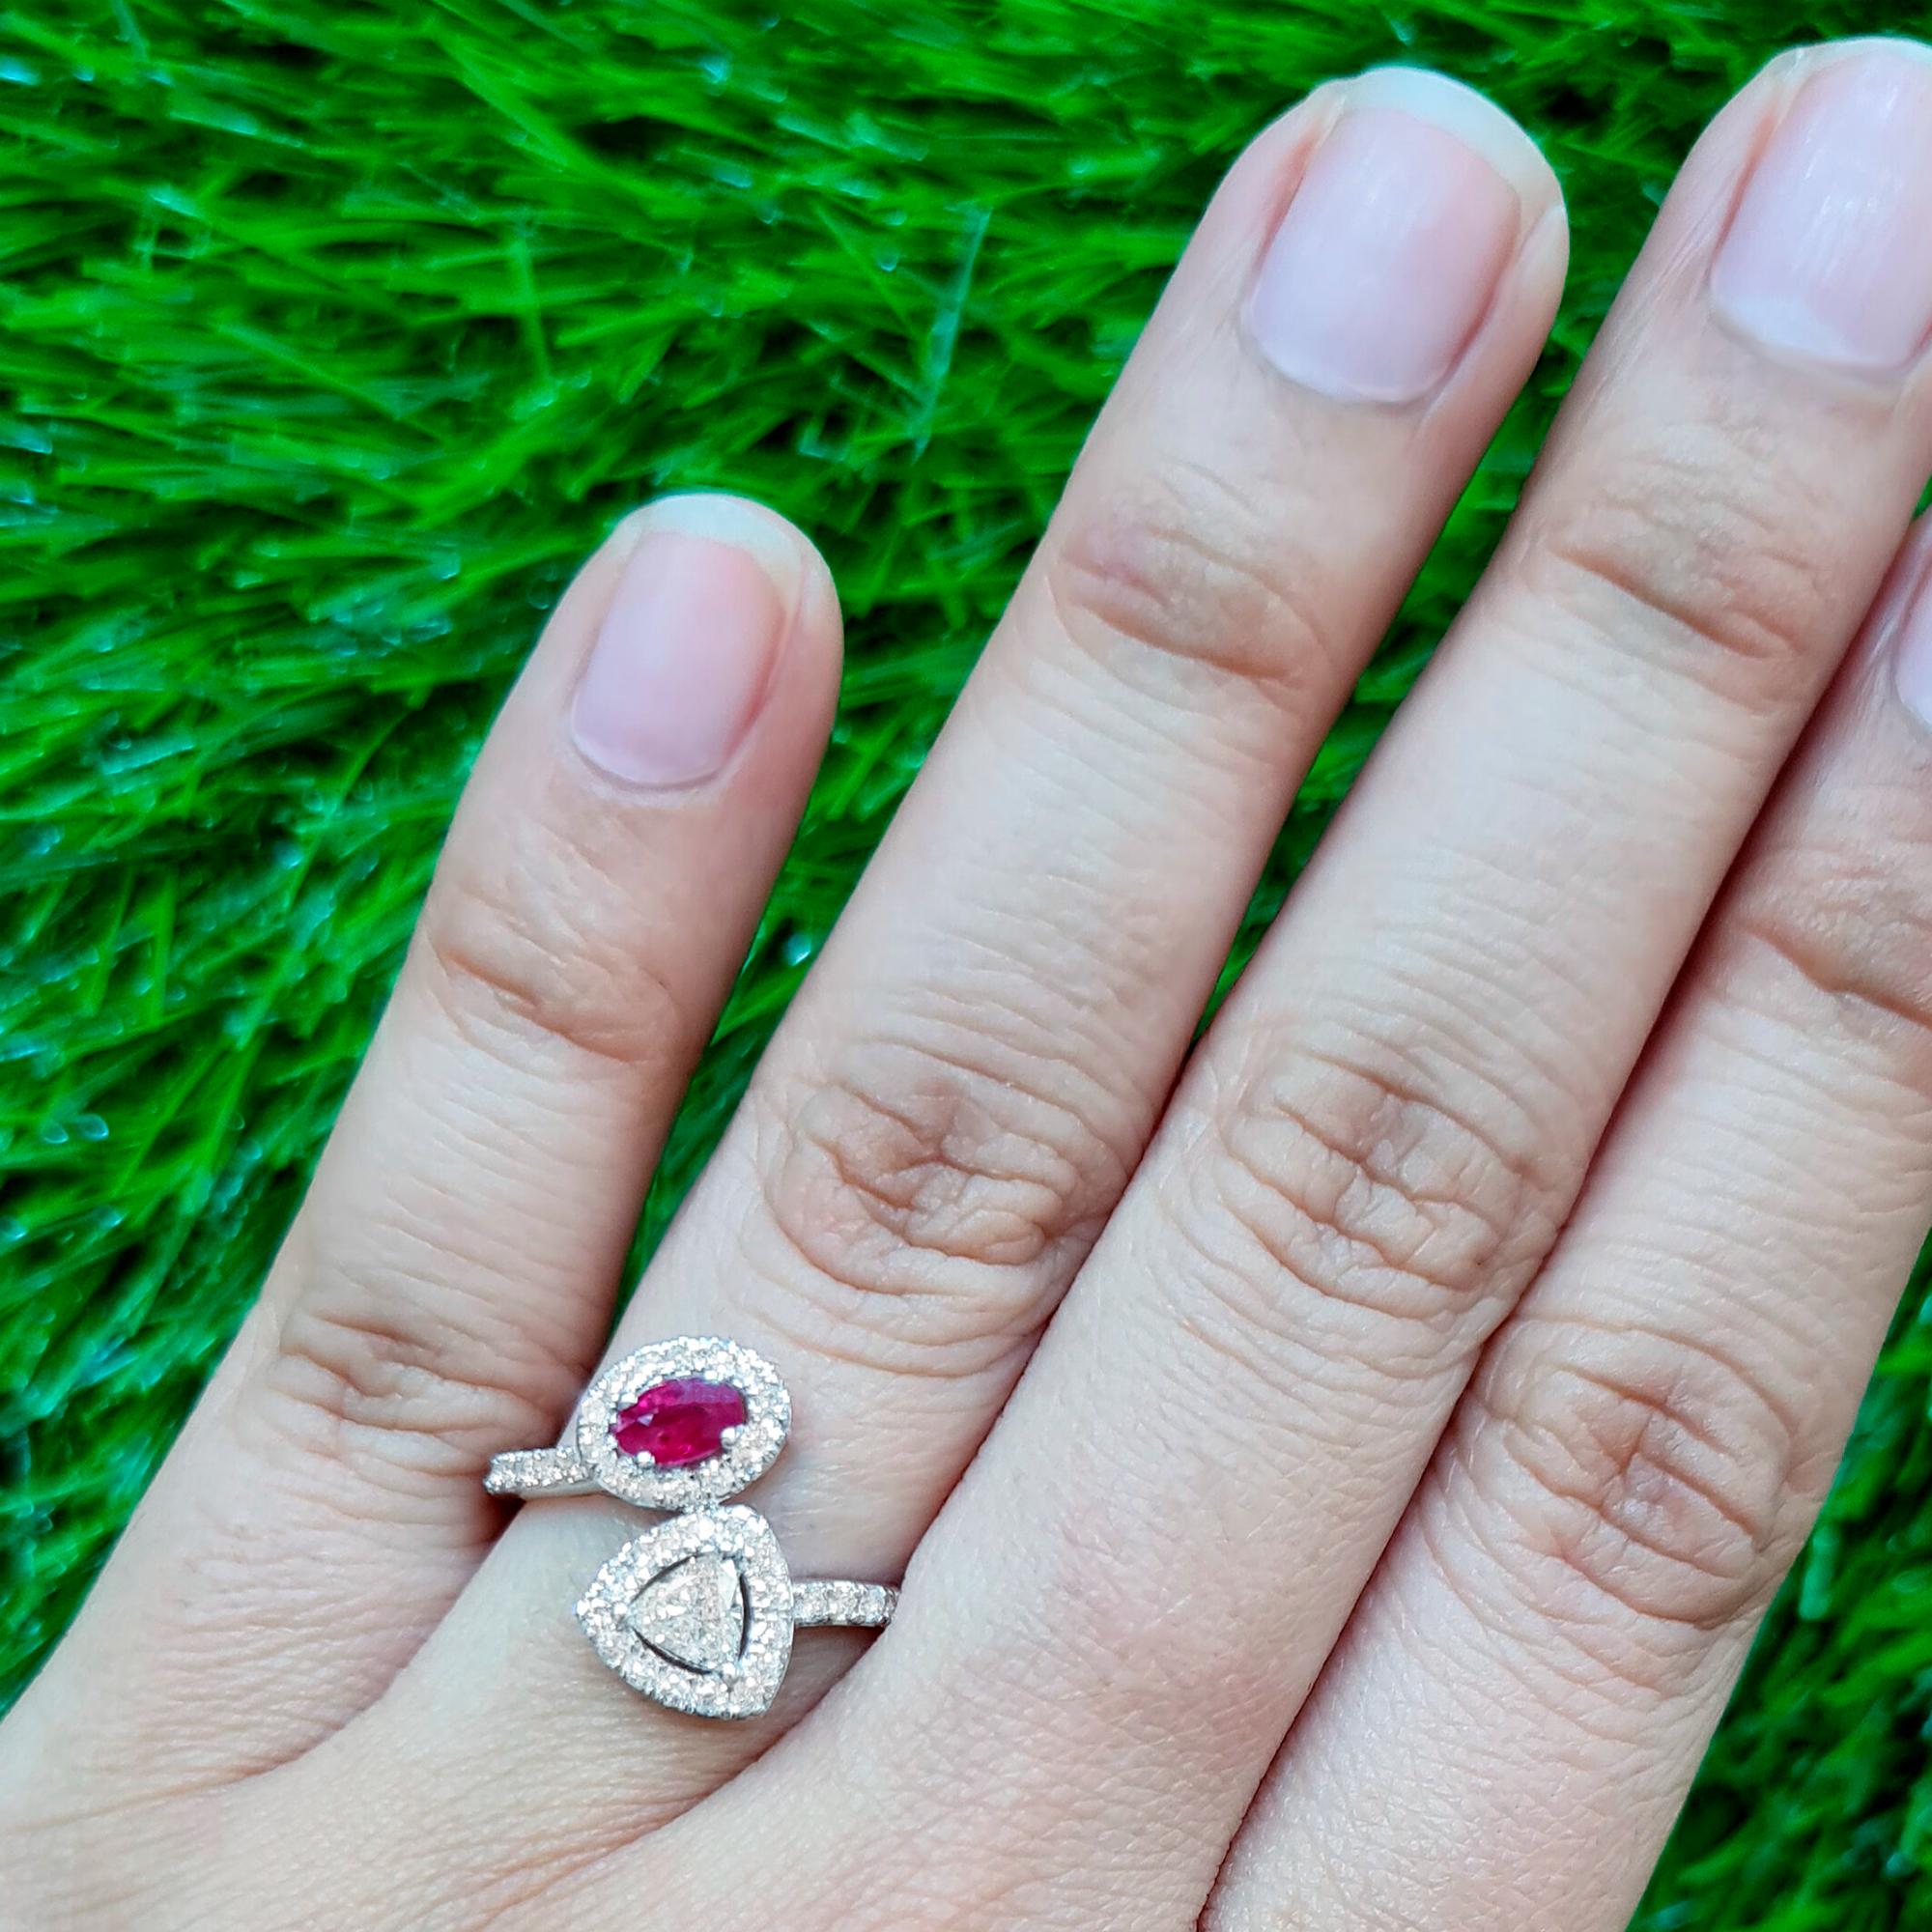 It comes with the Gemological Appraisal by GIA GG/AJP
All Gemstones are Natural
Ruby = 0.34 Carat
Diamonds = 0.76 Carats
Metal: 18K White Gold
Ring Size: 7* US
*It can be resized complimentary
